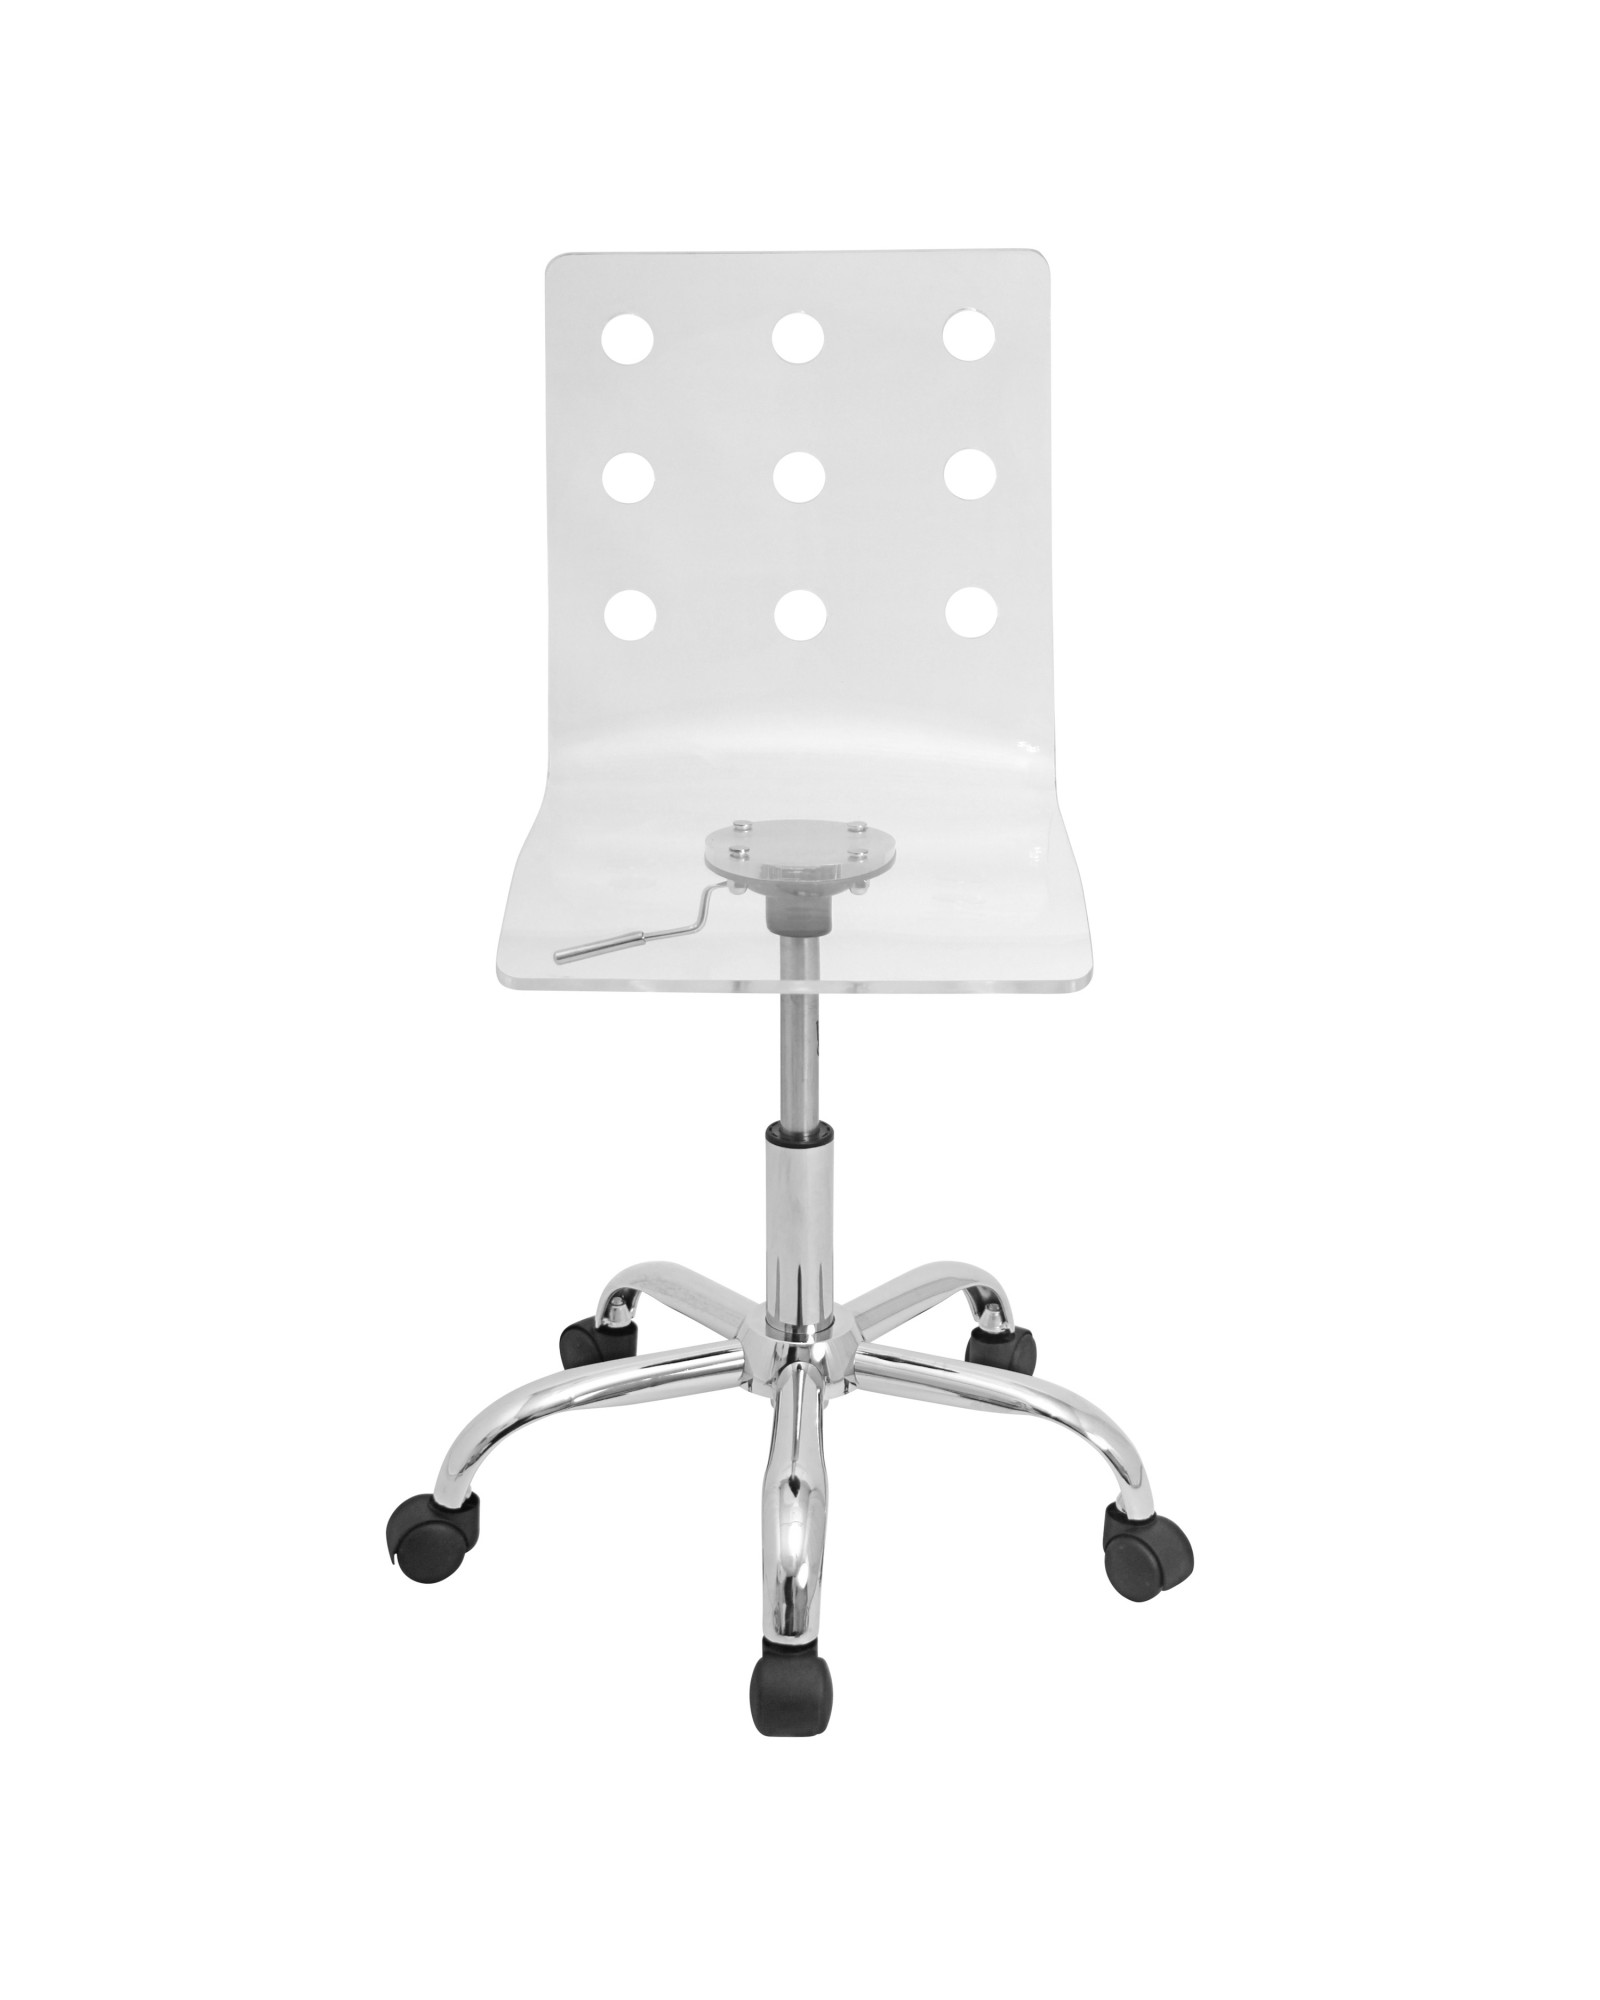 Swiss Contemporary Adjustable Office Chair with Swivel in Clear Acrylic